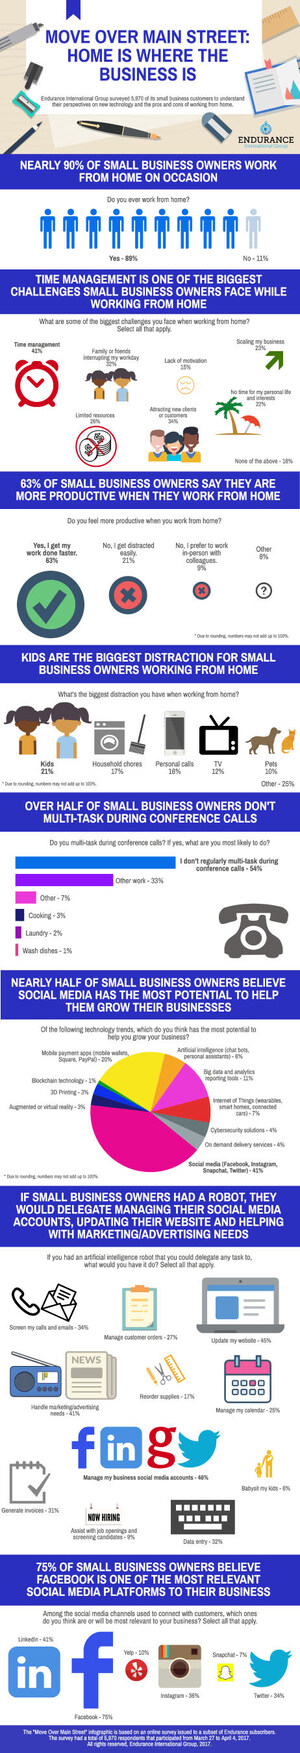 Survey Finds Time-Strapped Small Businesses Eager to Leverage New Technology From Home